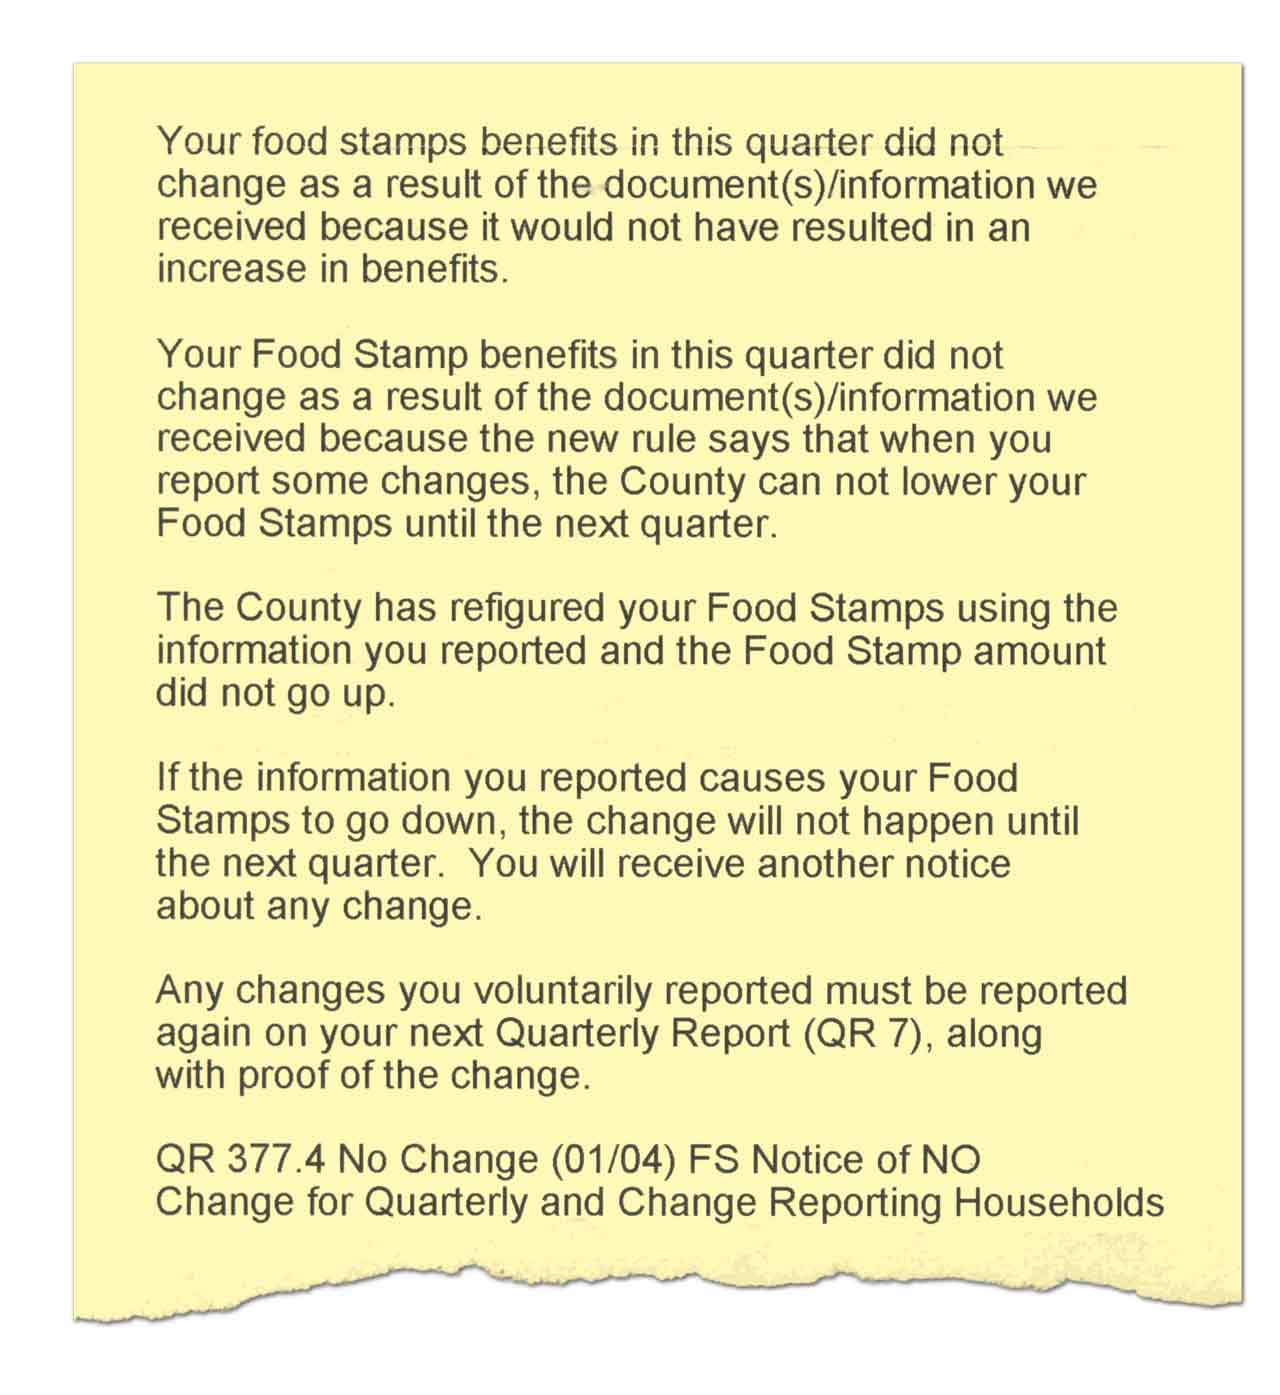 Your food stamps benefits in this quarter did not change as a result of the document(s)/information we received because it would not have resulted in an increase in benefits. Your Food Stamp benefits in this quarter did not change as a result of the document(s)/information we received because the new rule says that when you report some changes, the County cannot lower your Food Stamps until the next quarter. The County has refigured your Food Stamps using the information you reported and the Food Stamp amount did not go up. If the information you reported causes your Food Stamps to go down, the change will not happen until the next quarter. You will receive another notice about any change. Any changes you voluntarily reported must be reported again on the next Quarterly report (QR 7), along with proof of the change. QR 377.4 No Change (01/04) FS Notice of NO Change for Quarterly and Change Reporting Households.